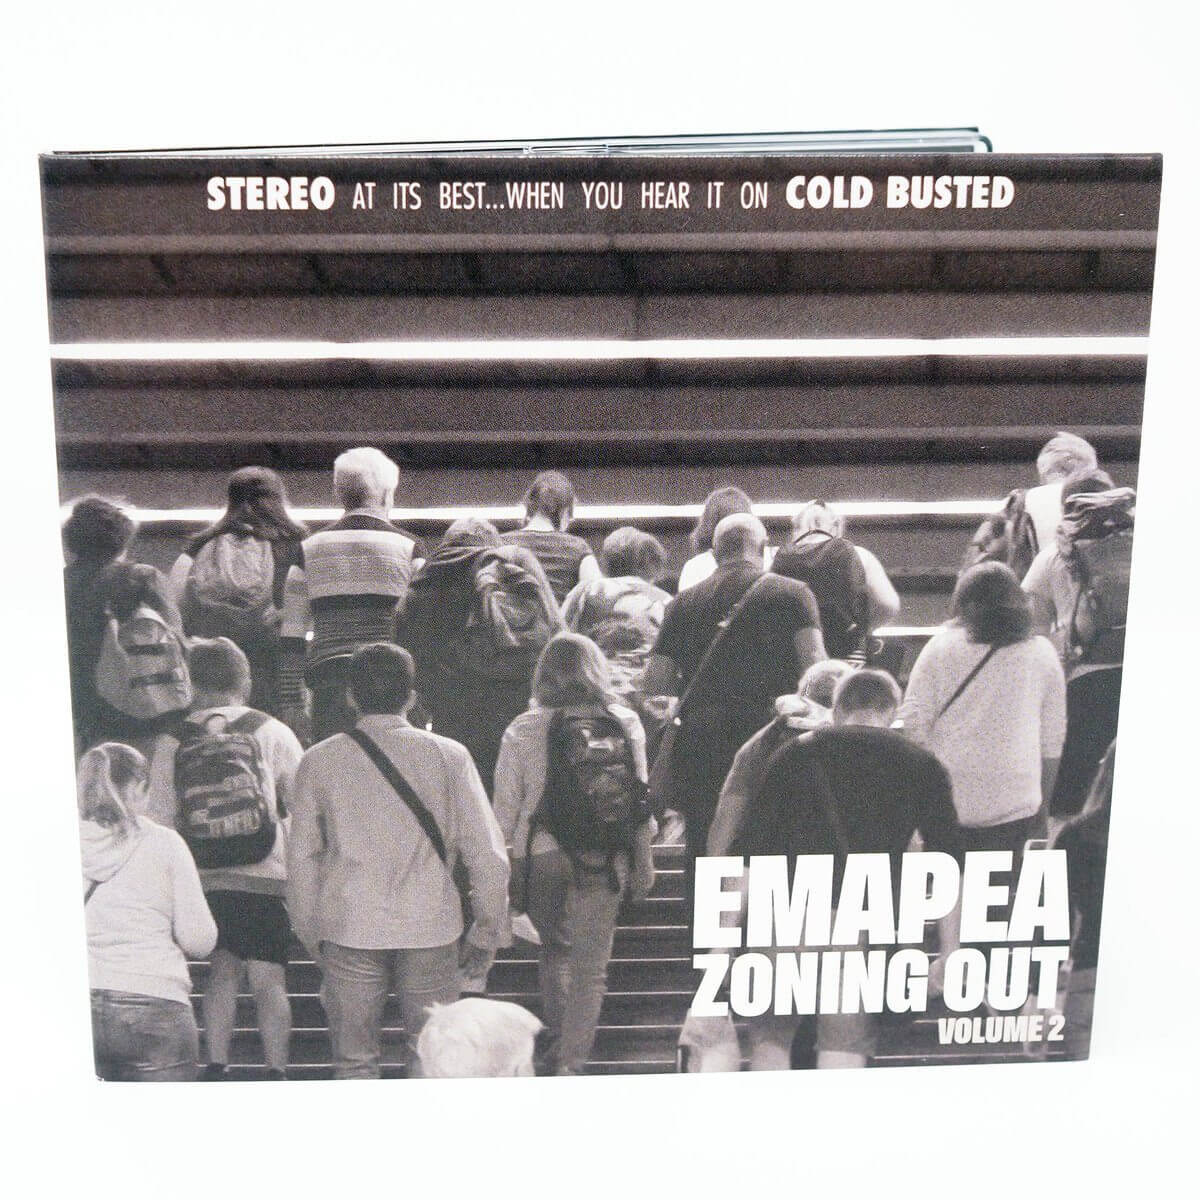 Emapea - Zoning Out Volume 2 - Limited Edition Compact Disc - Cold Busted